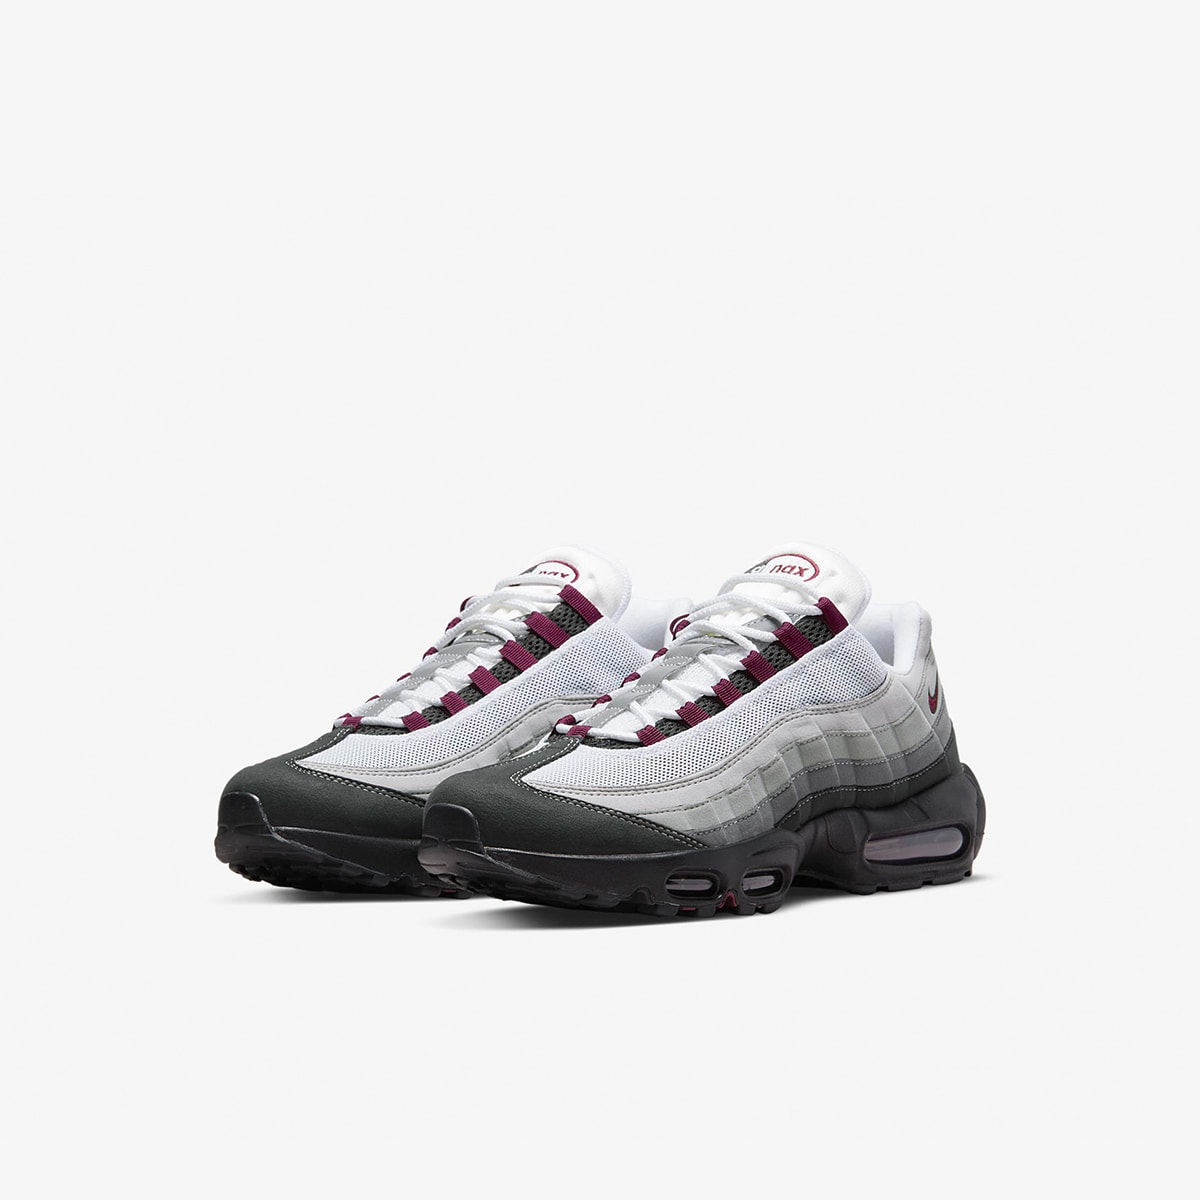 Nike Air Max 95 OG (Black & Dark Beetroot) | END. Launches